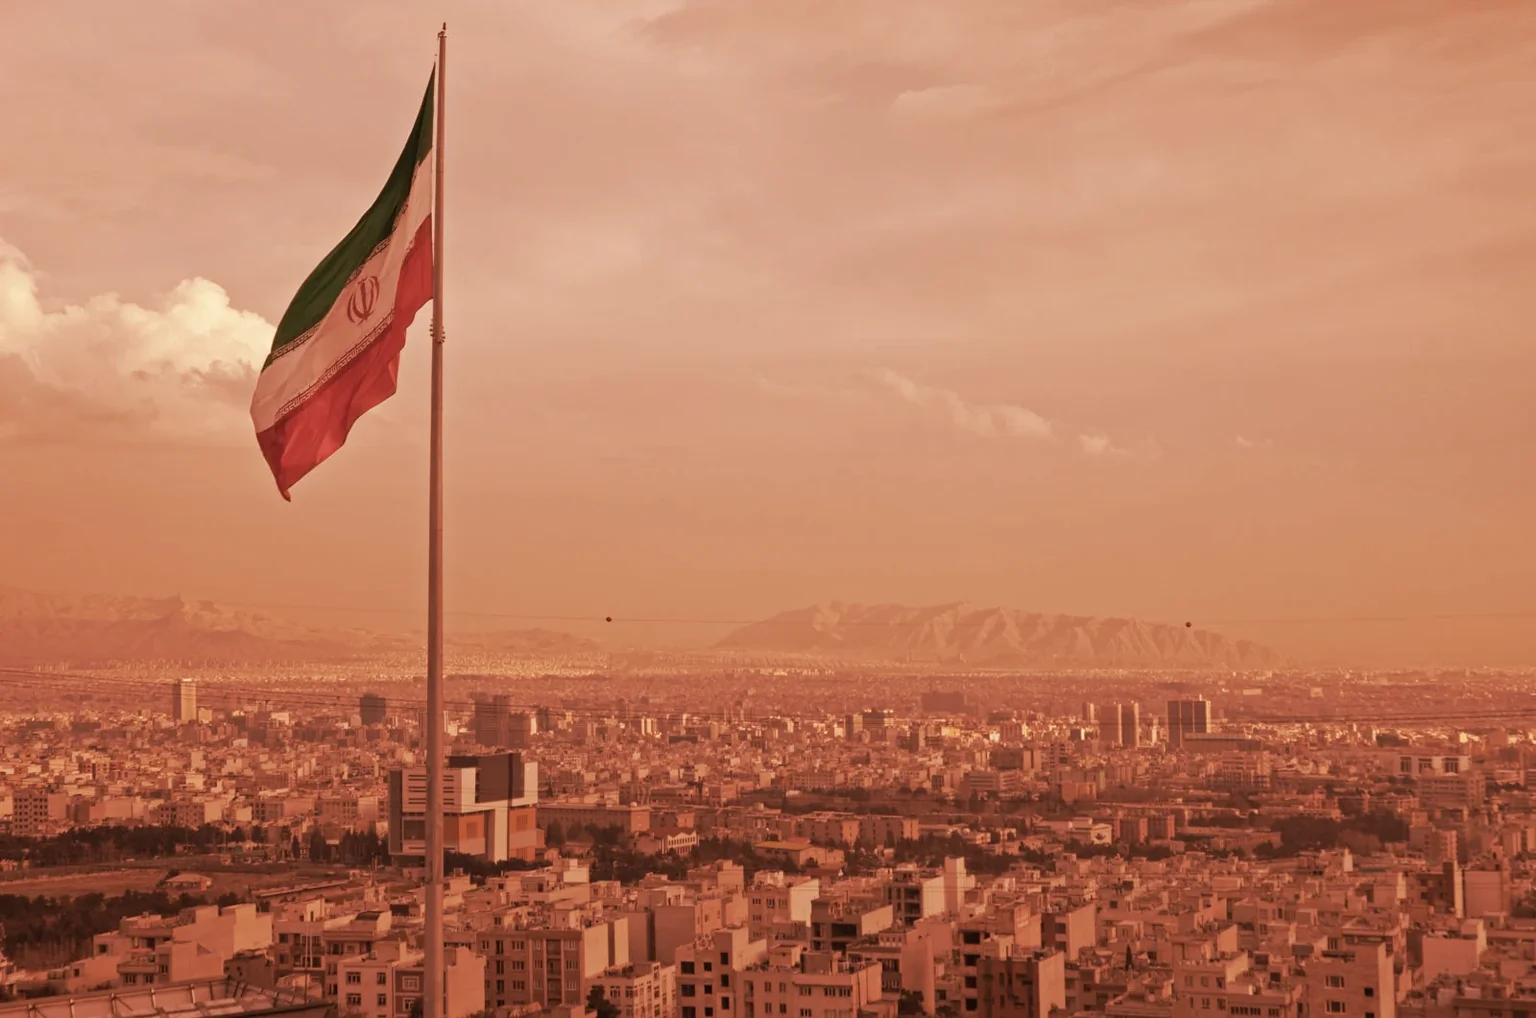 Business in Iran are asking tourists to buy goods and services using crypto. So far, few have been willing to help out. PHOTO CREDIT: Shutterstock